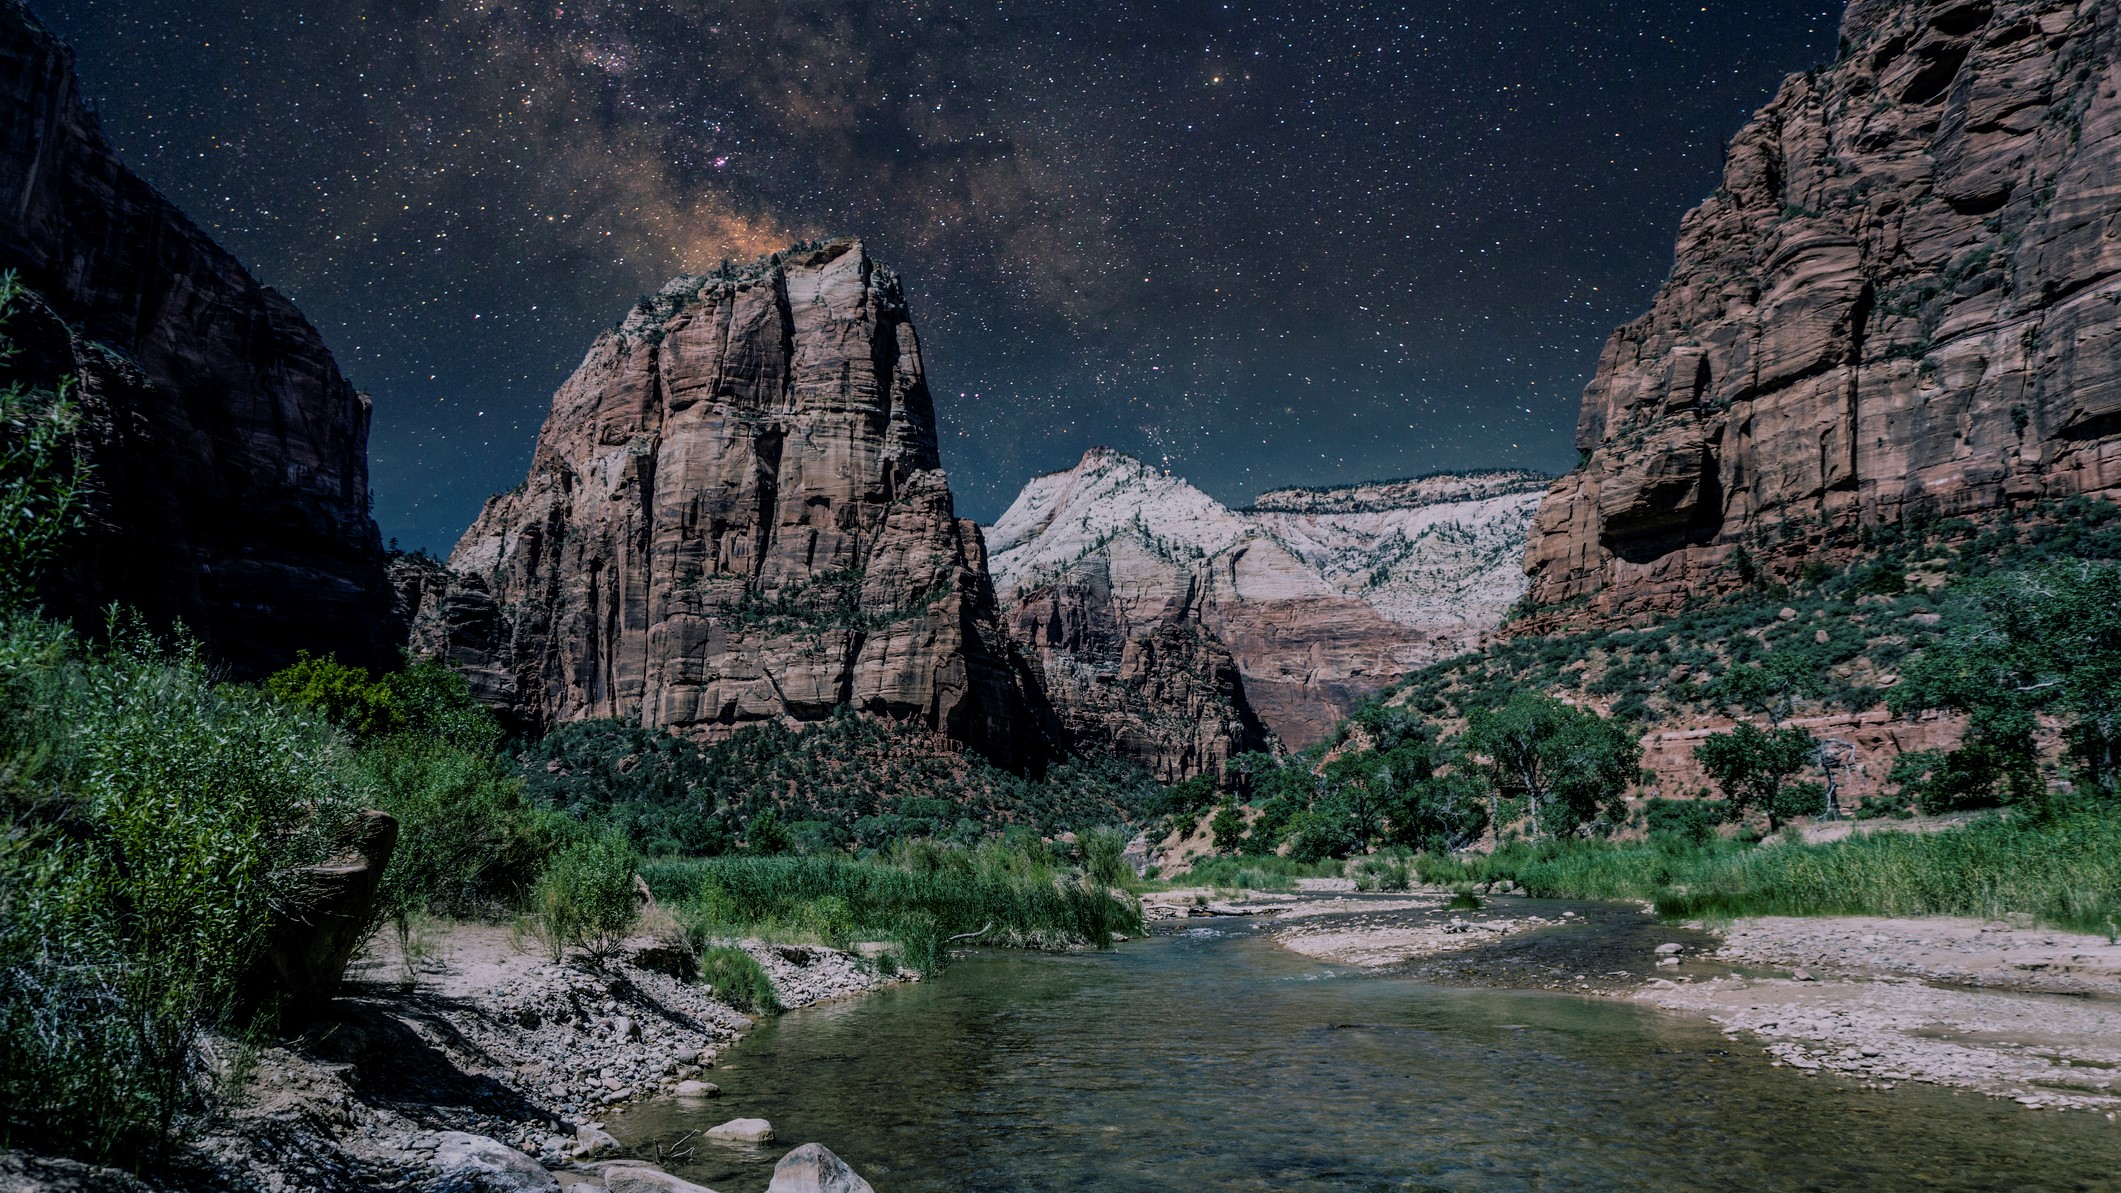 a river flows toward the foreground of the image with large rock structures behind and a star studded sky in the distance.